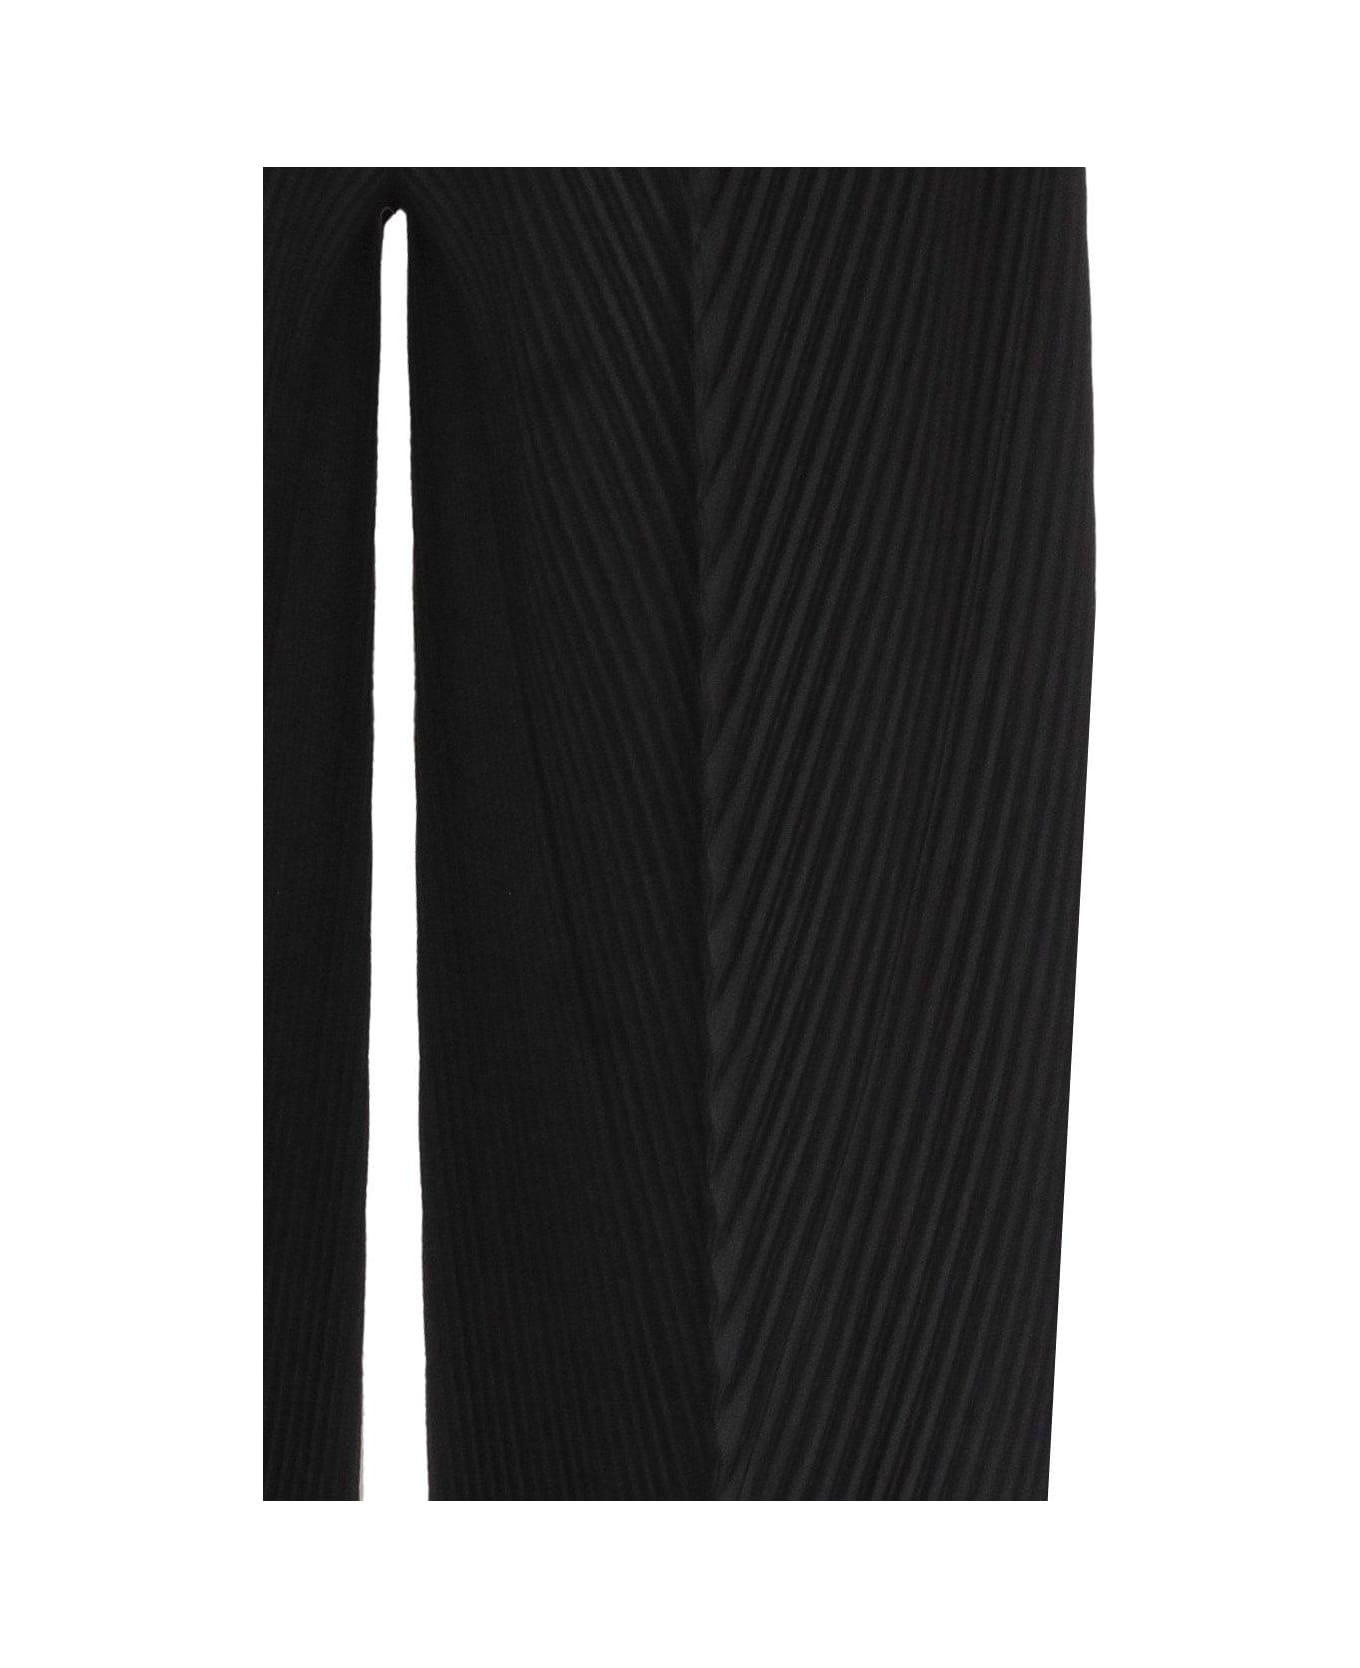 Homme Plissé Issey Miyake Pleated Cropped Trousers - Black ボトムス